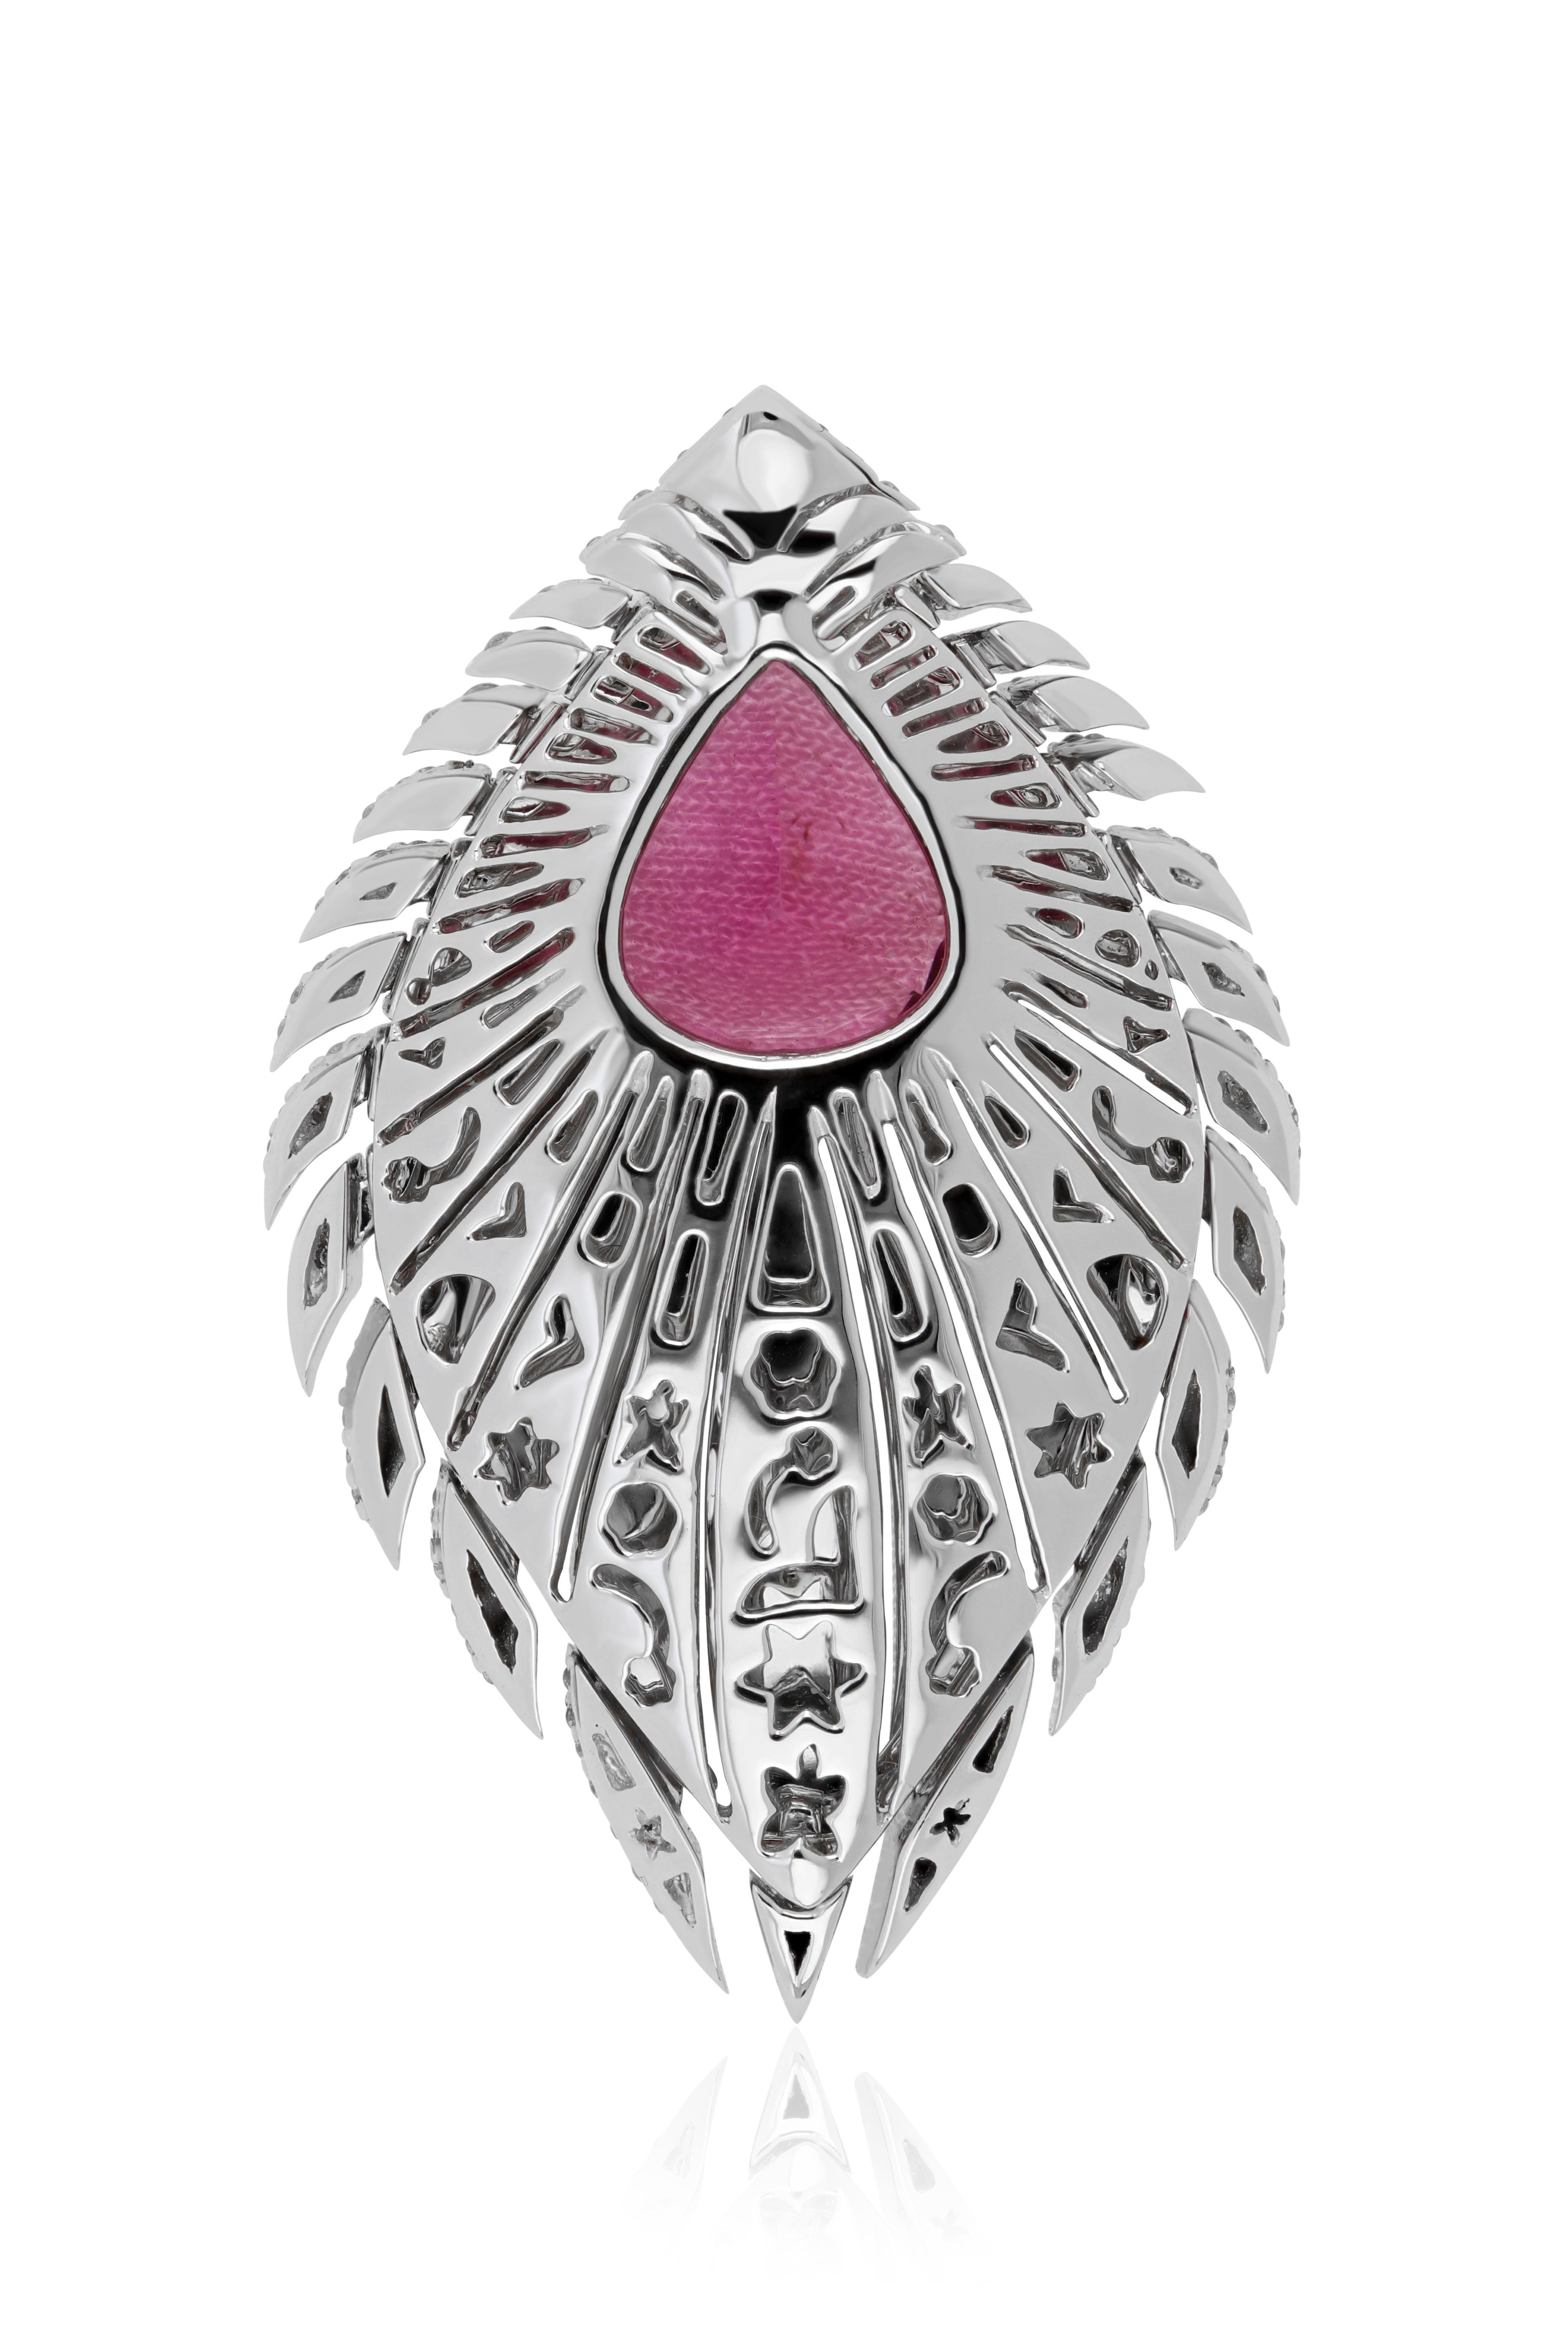 Pear Cut 4.85 Carat Rubellite & Diamond Pendant in 18K White Gold Pendant for Party Wear For Sale